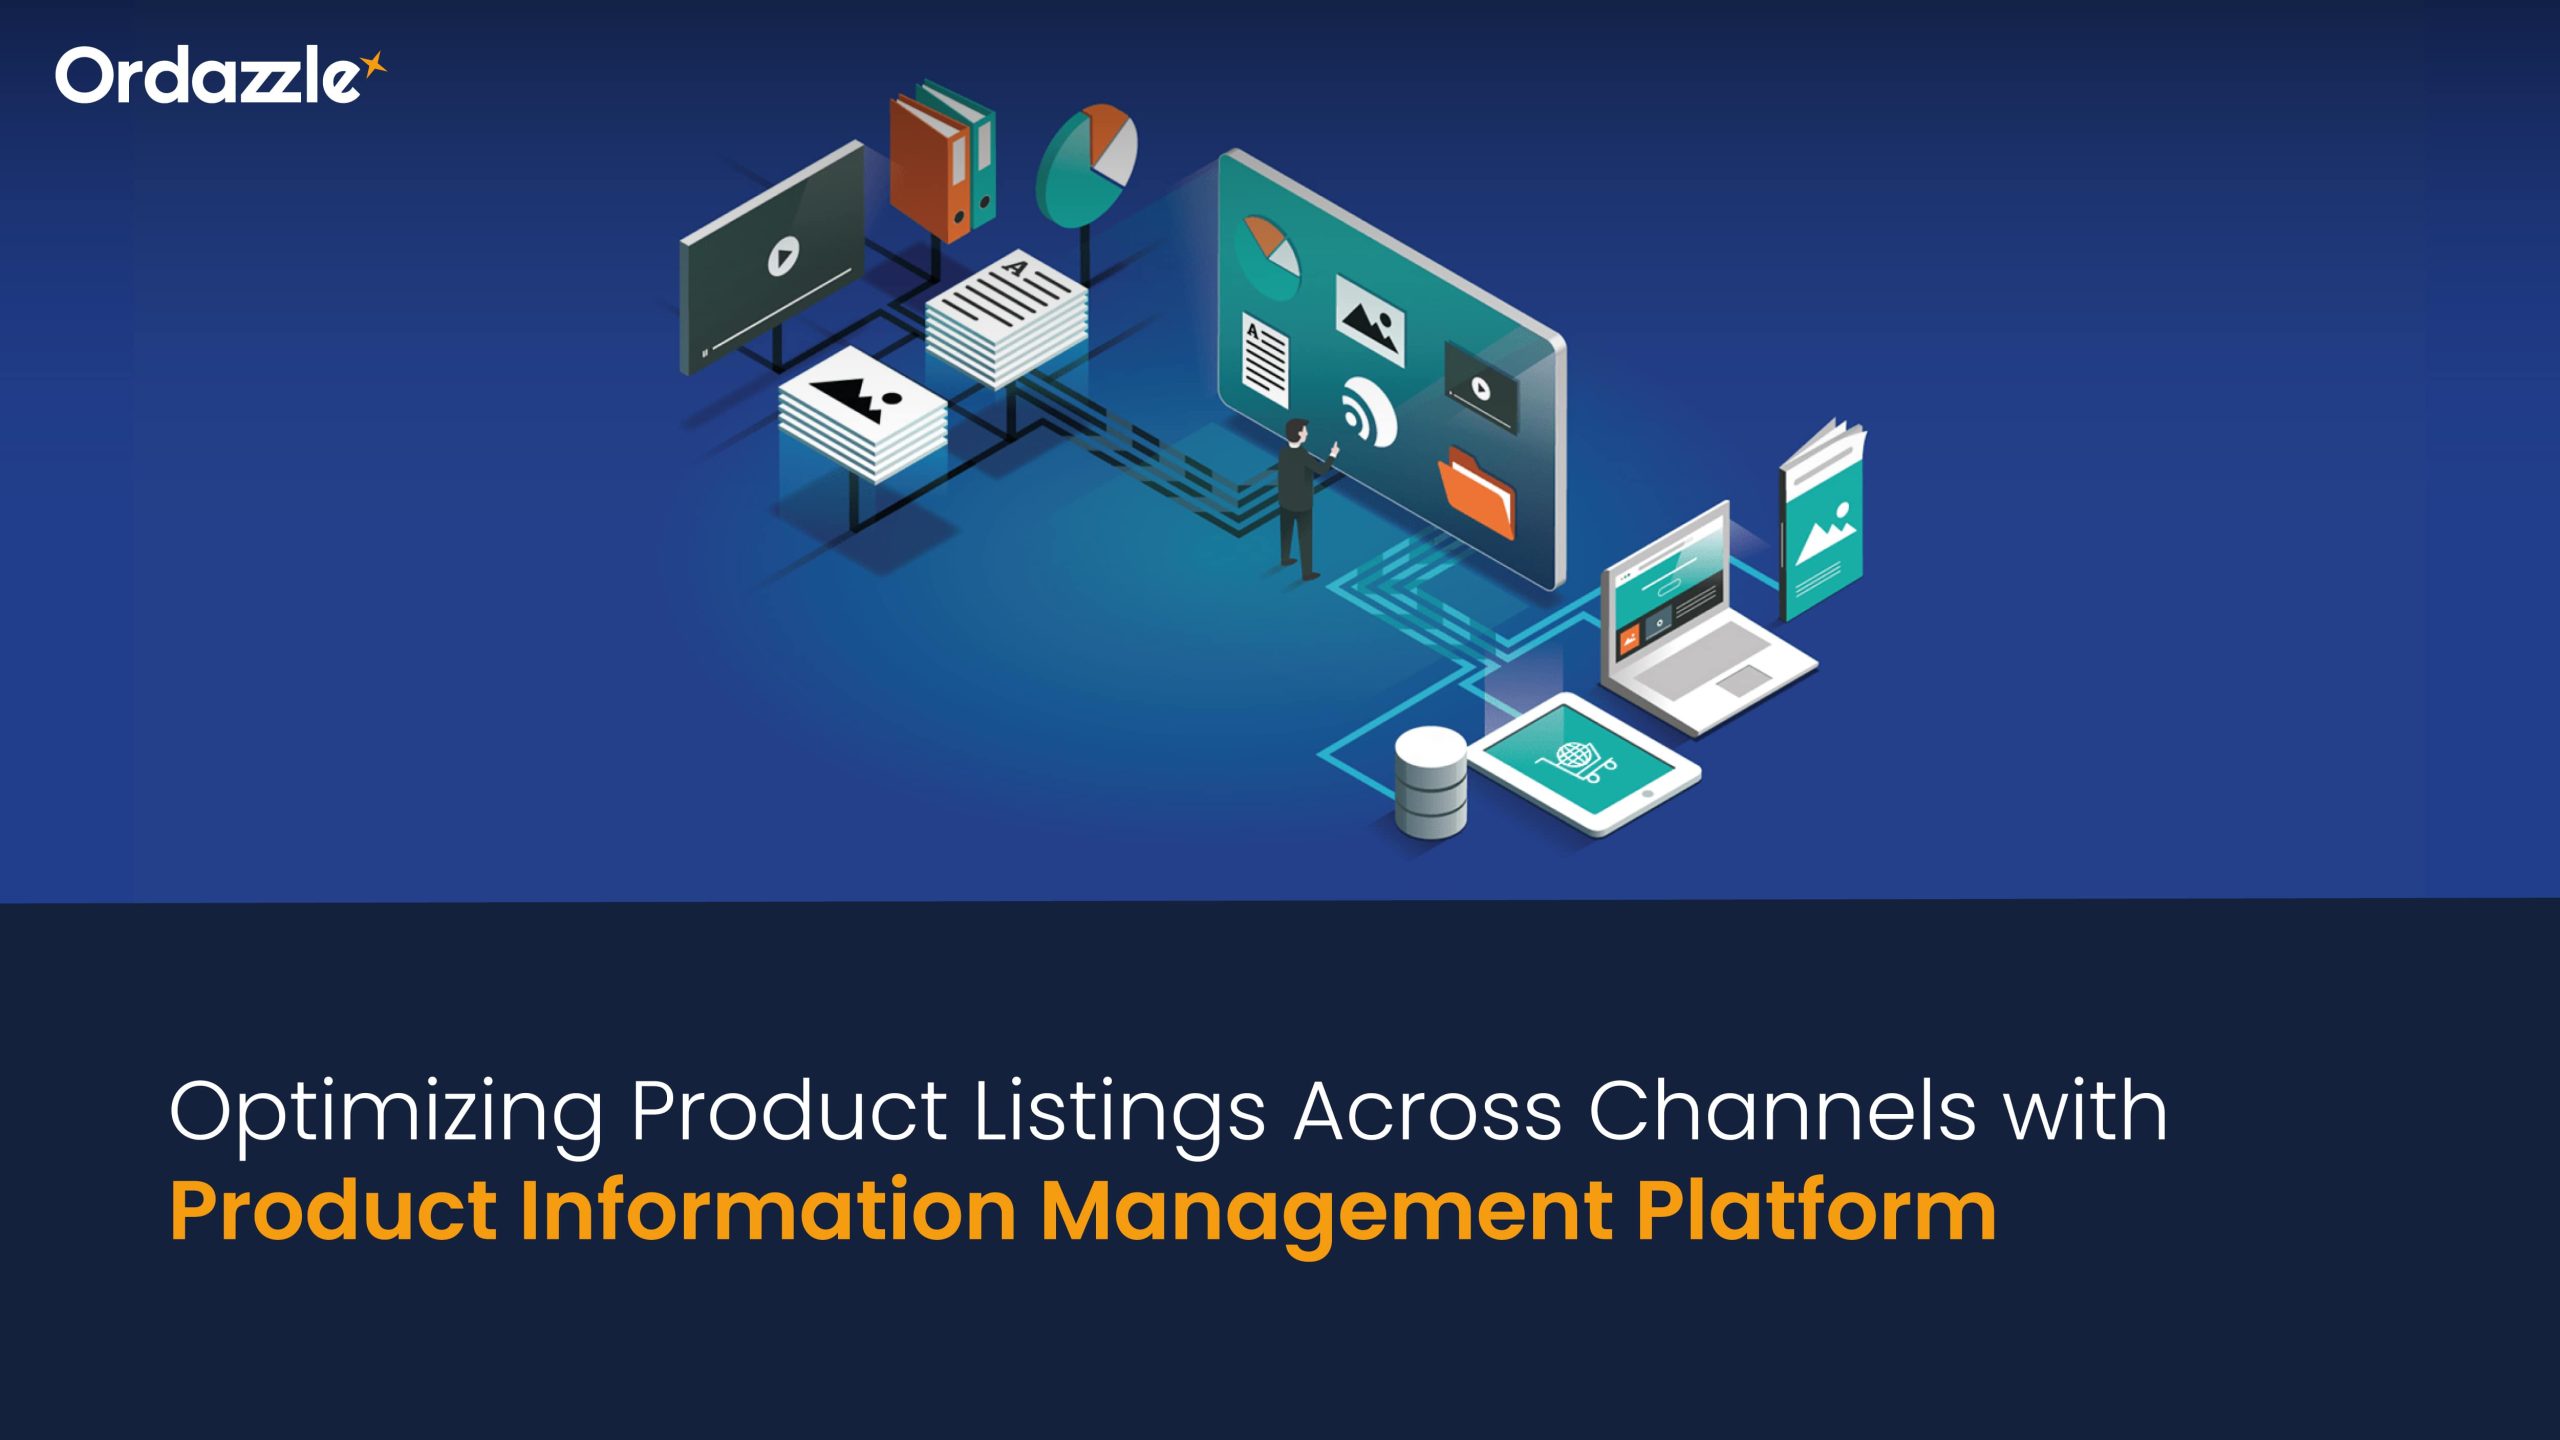 Optimizing Product Listings Across Channels with Product Information Management